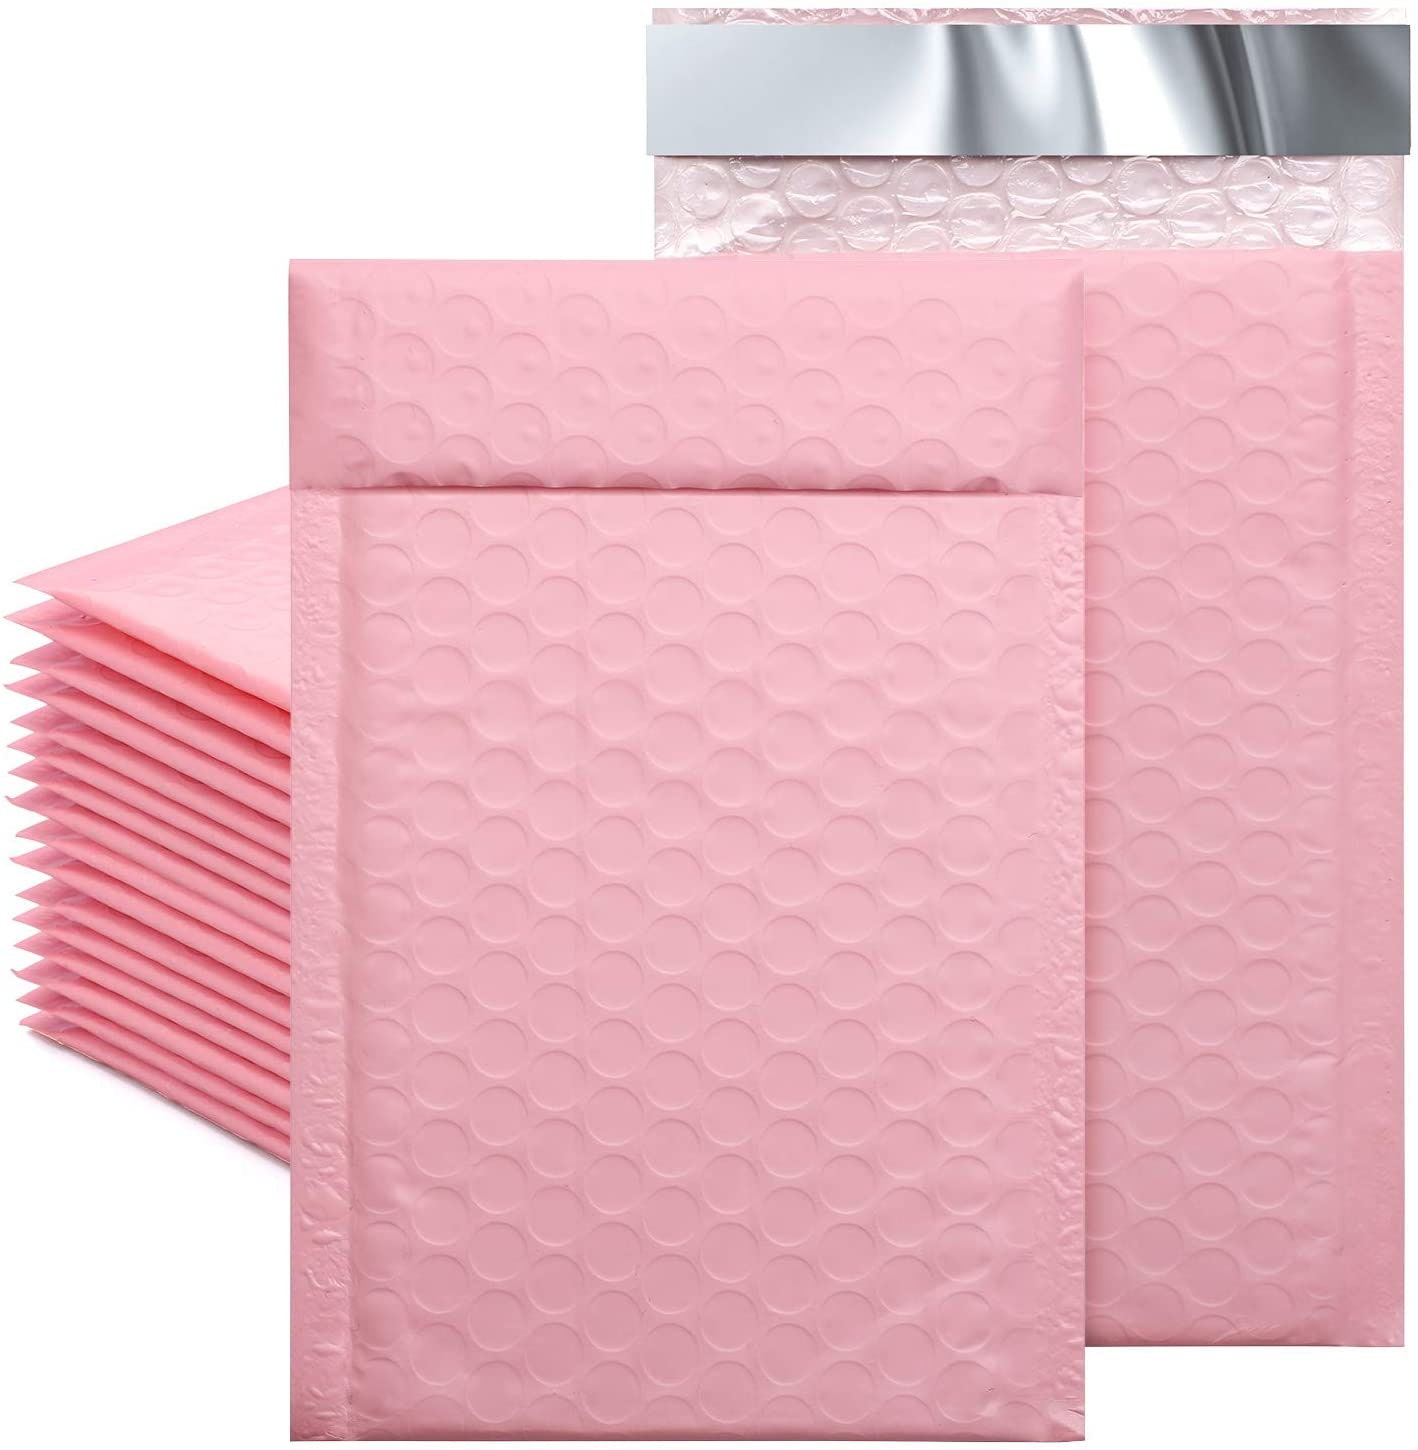 Shoze 50 Pcs Pink Foil Bubble Padded Bag Mailing Envelopes Padded Mailing Shipping Packaging Bags for Promotions or and Alternative to Gift wrap 15 * 18CM 